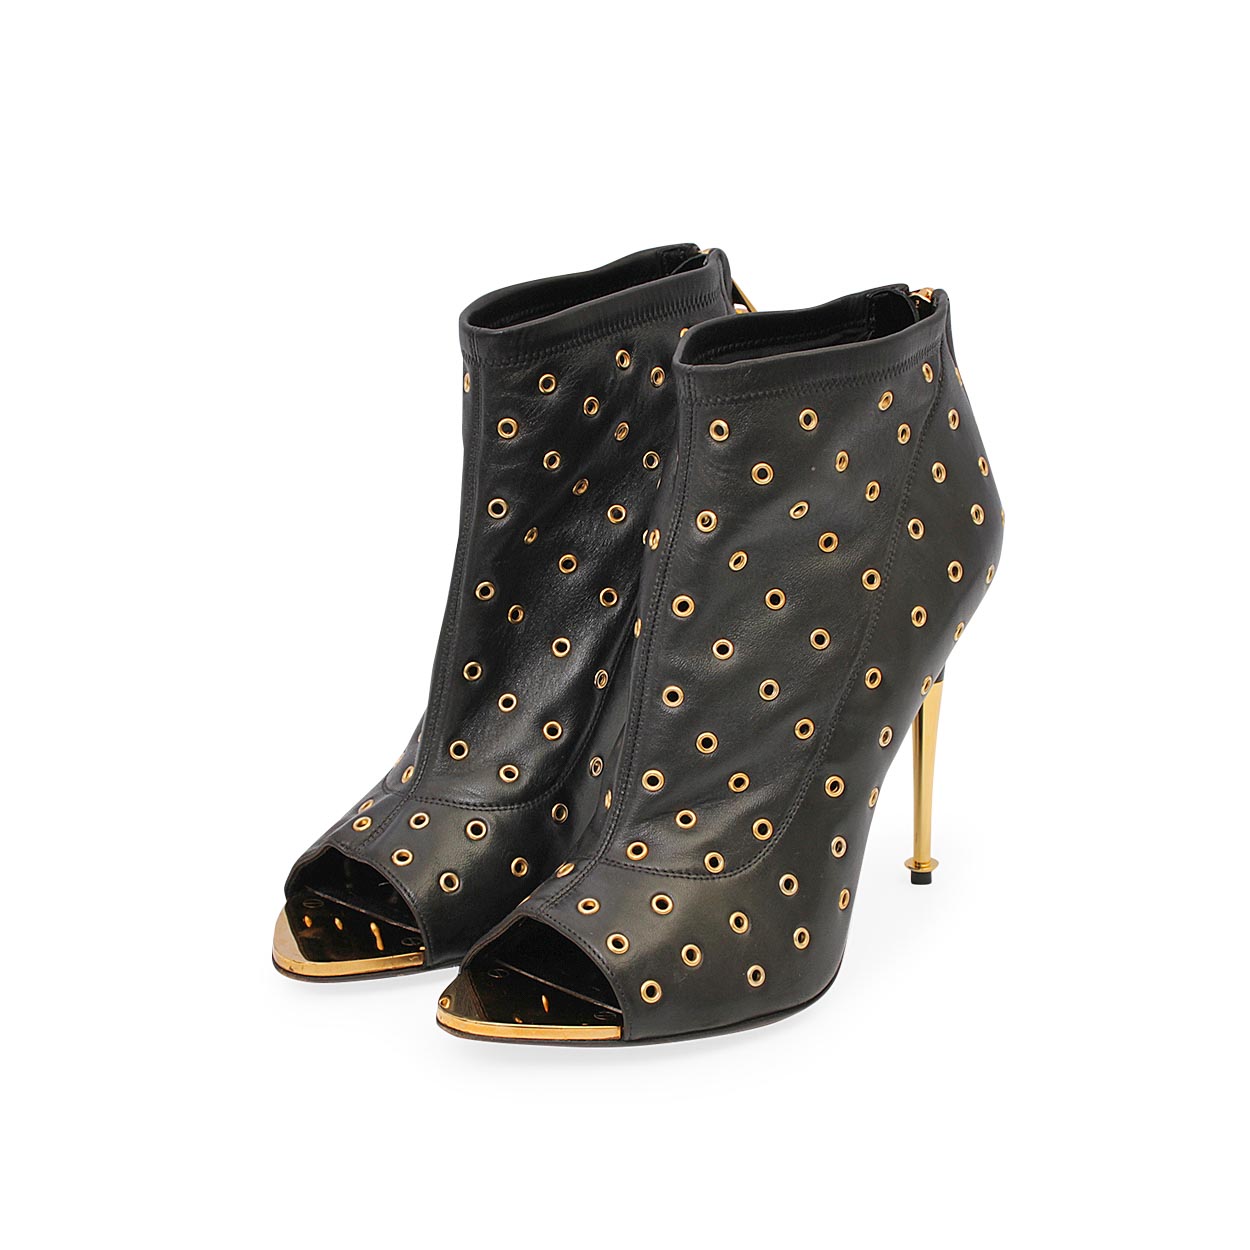 TOM FORD Leather Grommet Peep Toe Ankle Boots Black/Gold - S: 40 (6.5 ...